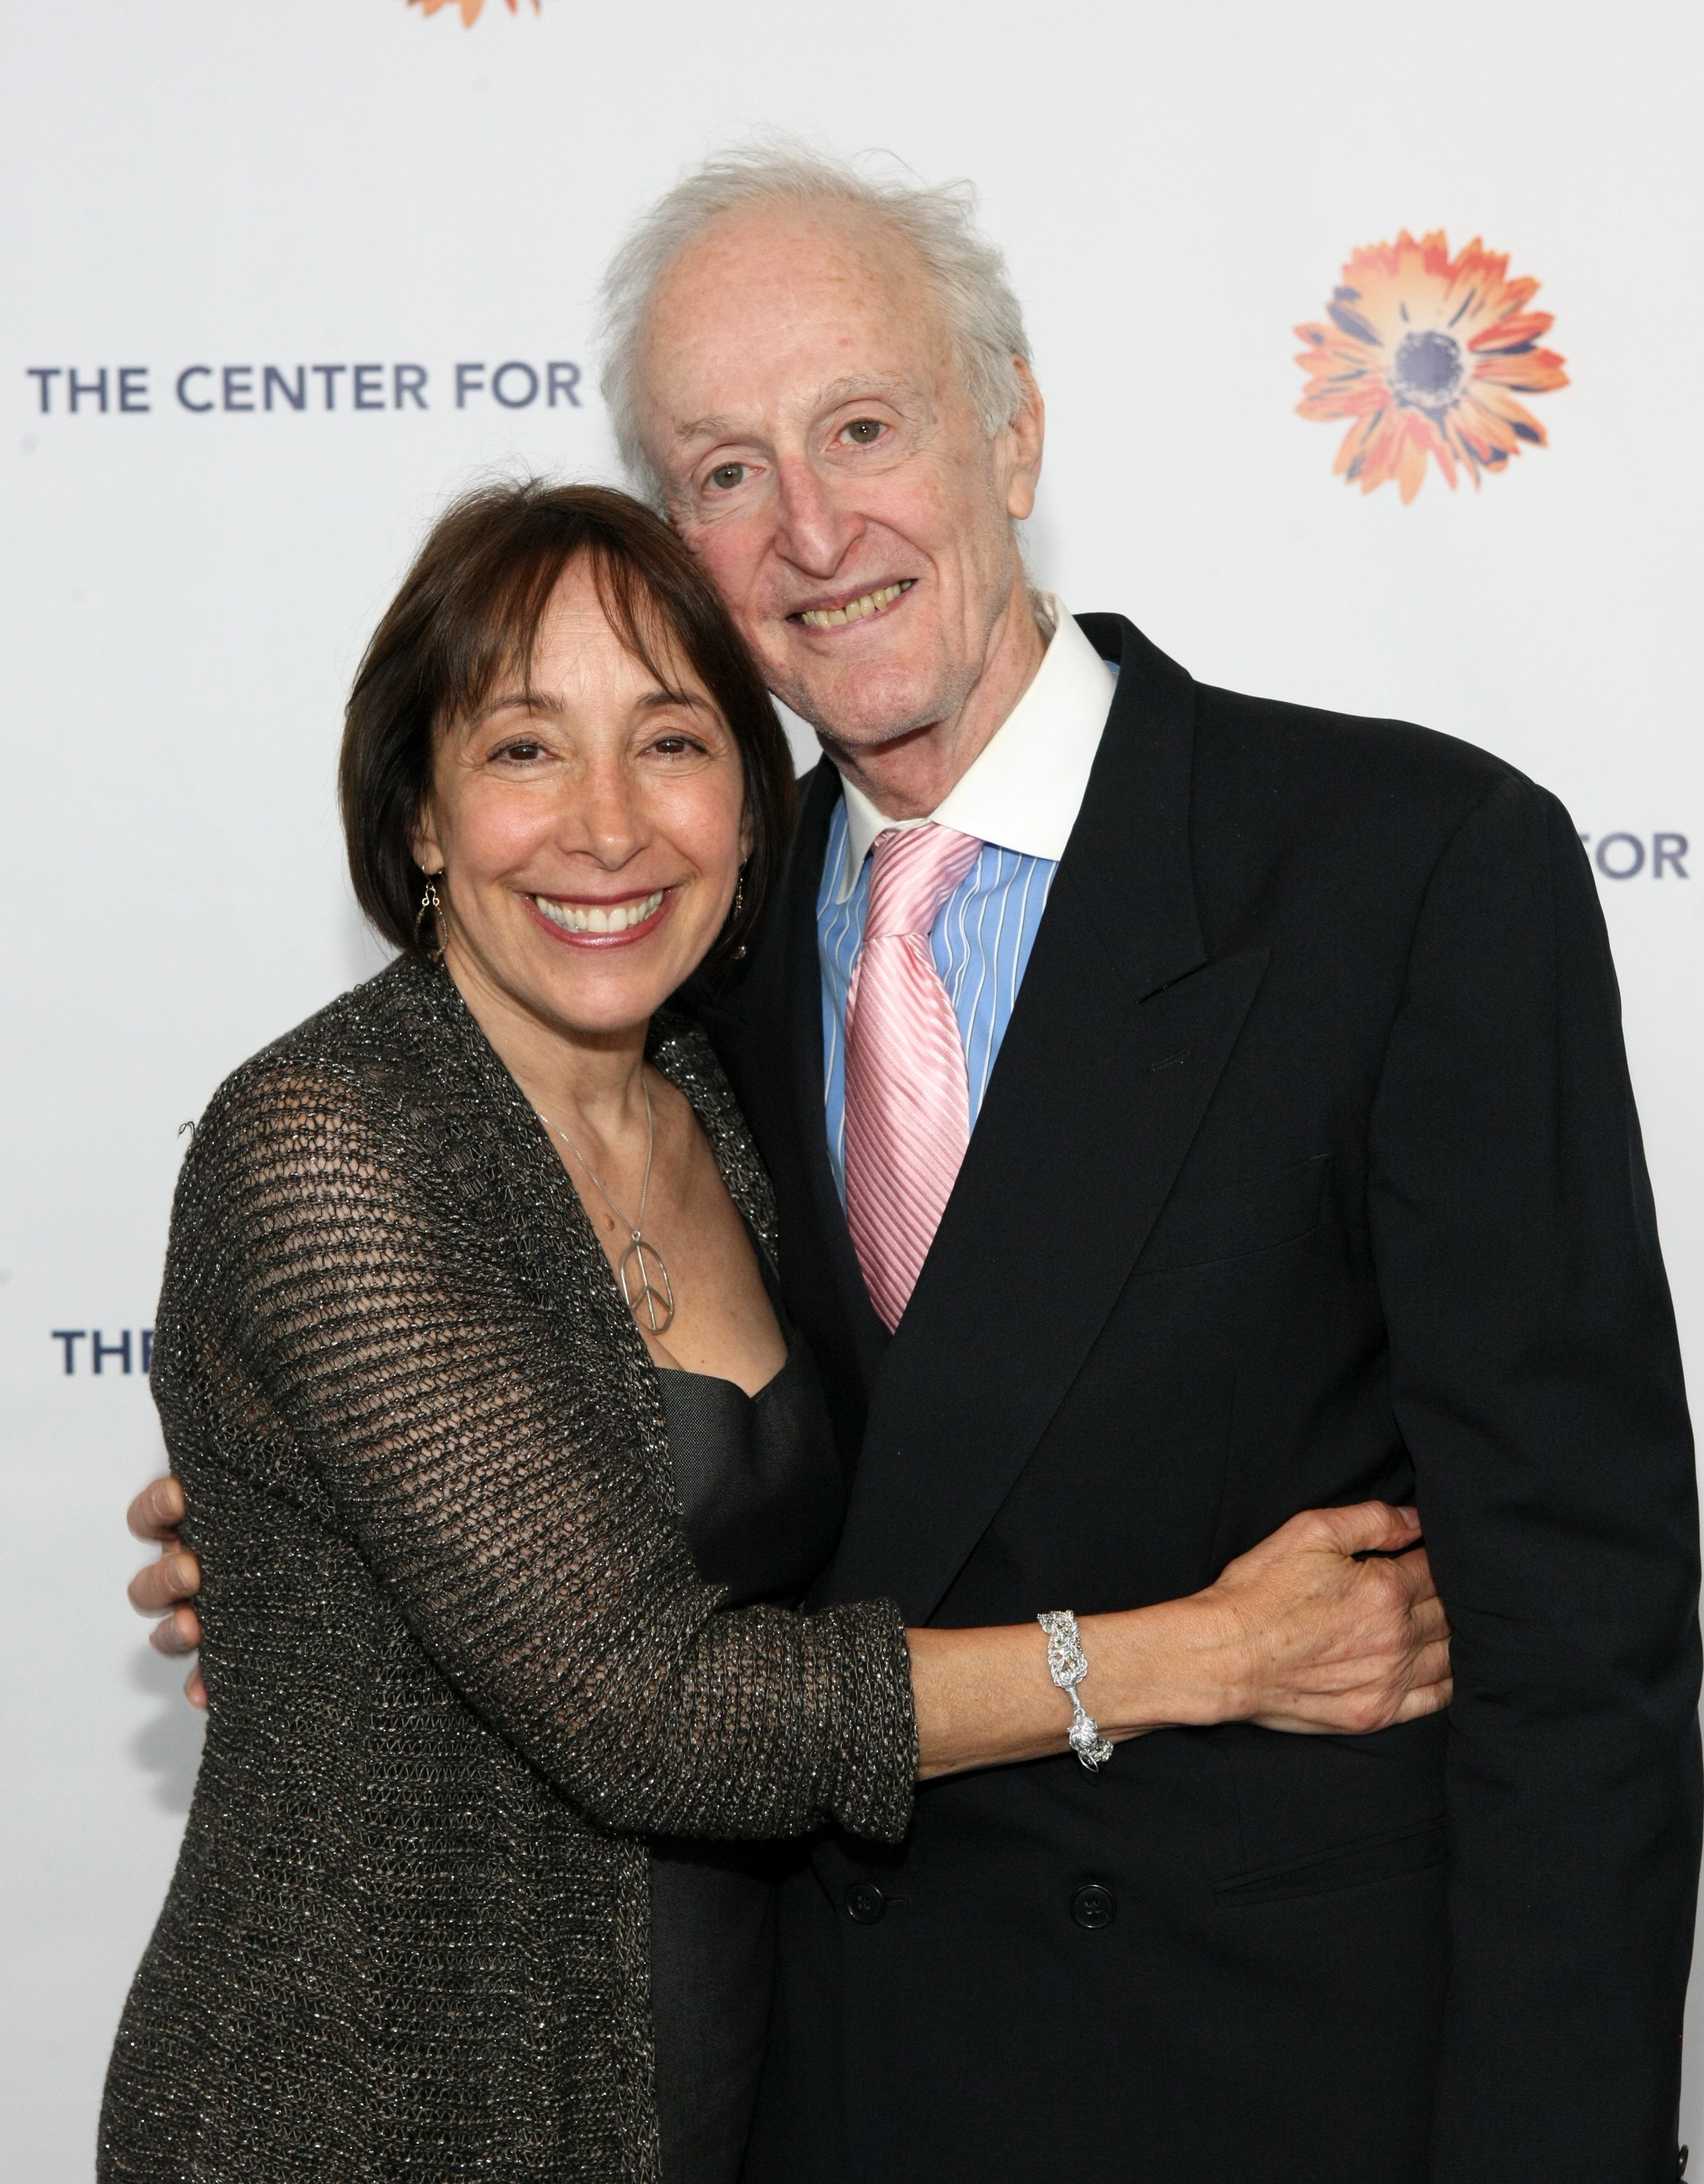 Didi Conn and her husband David Shire attend the "Evening Of Discovery" Gala at Pier Sixty at Chelsea Piers on May 15, 2012 in New York City | Source: Getty Images